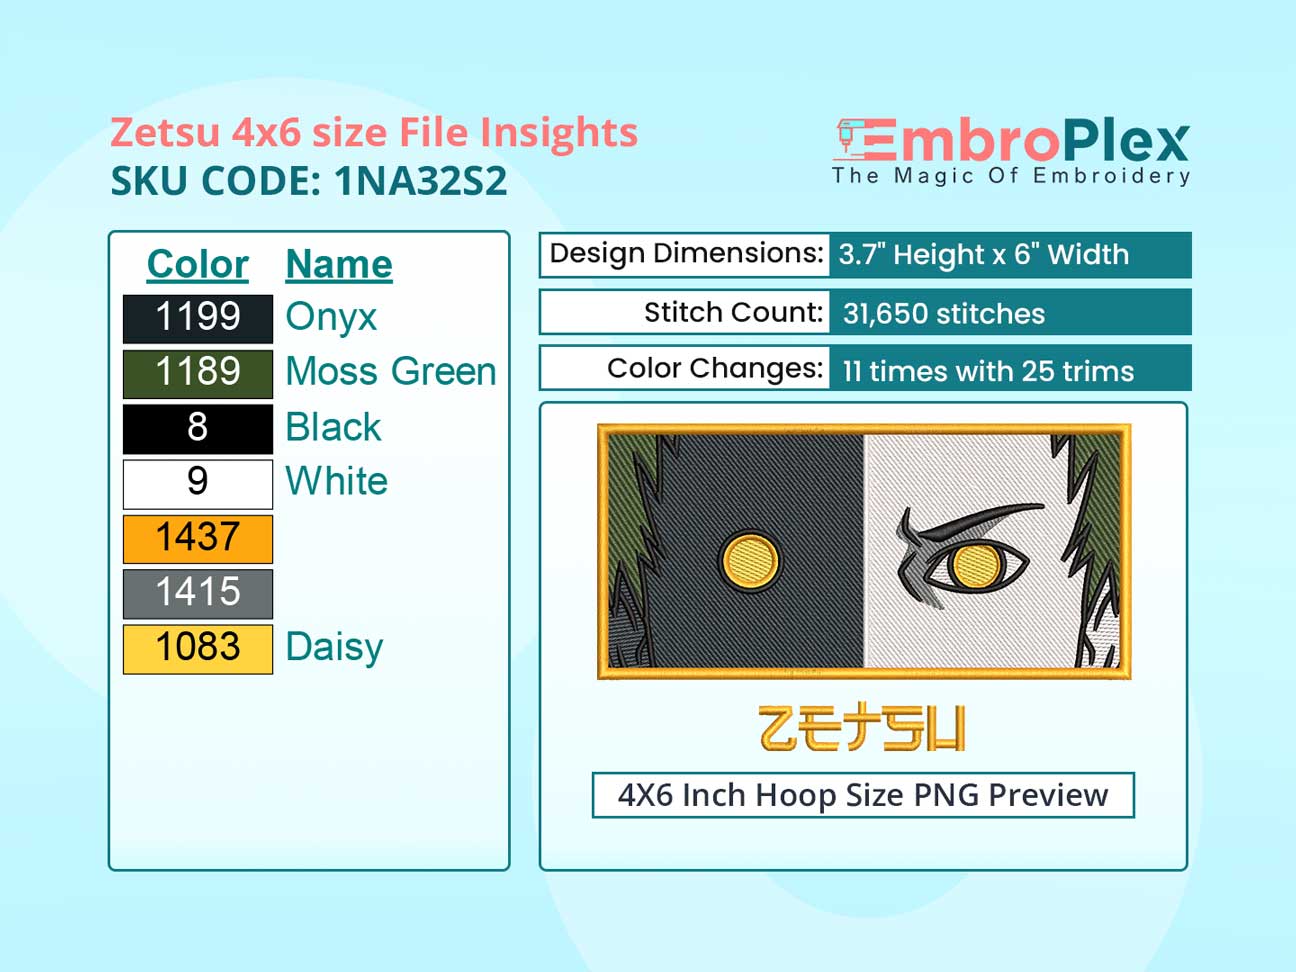 Anime-Inspired Zetsu Embroidery Design File - 4x6 Inch hoop Size Variation overview image